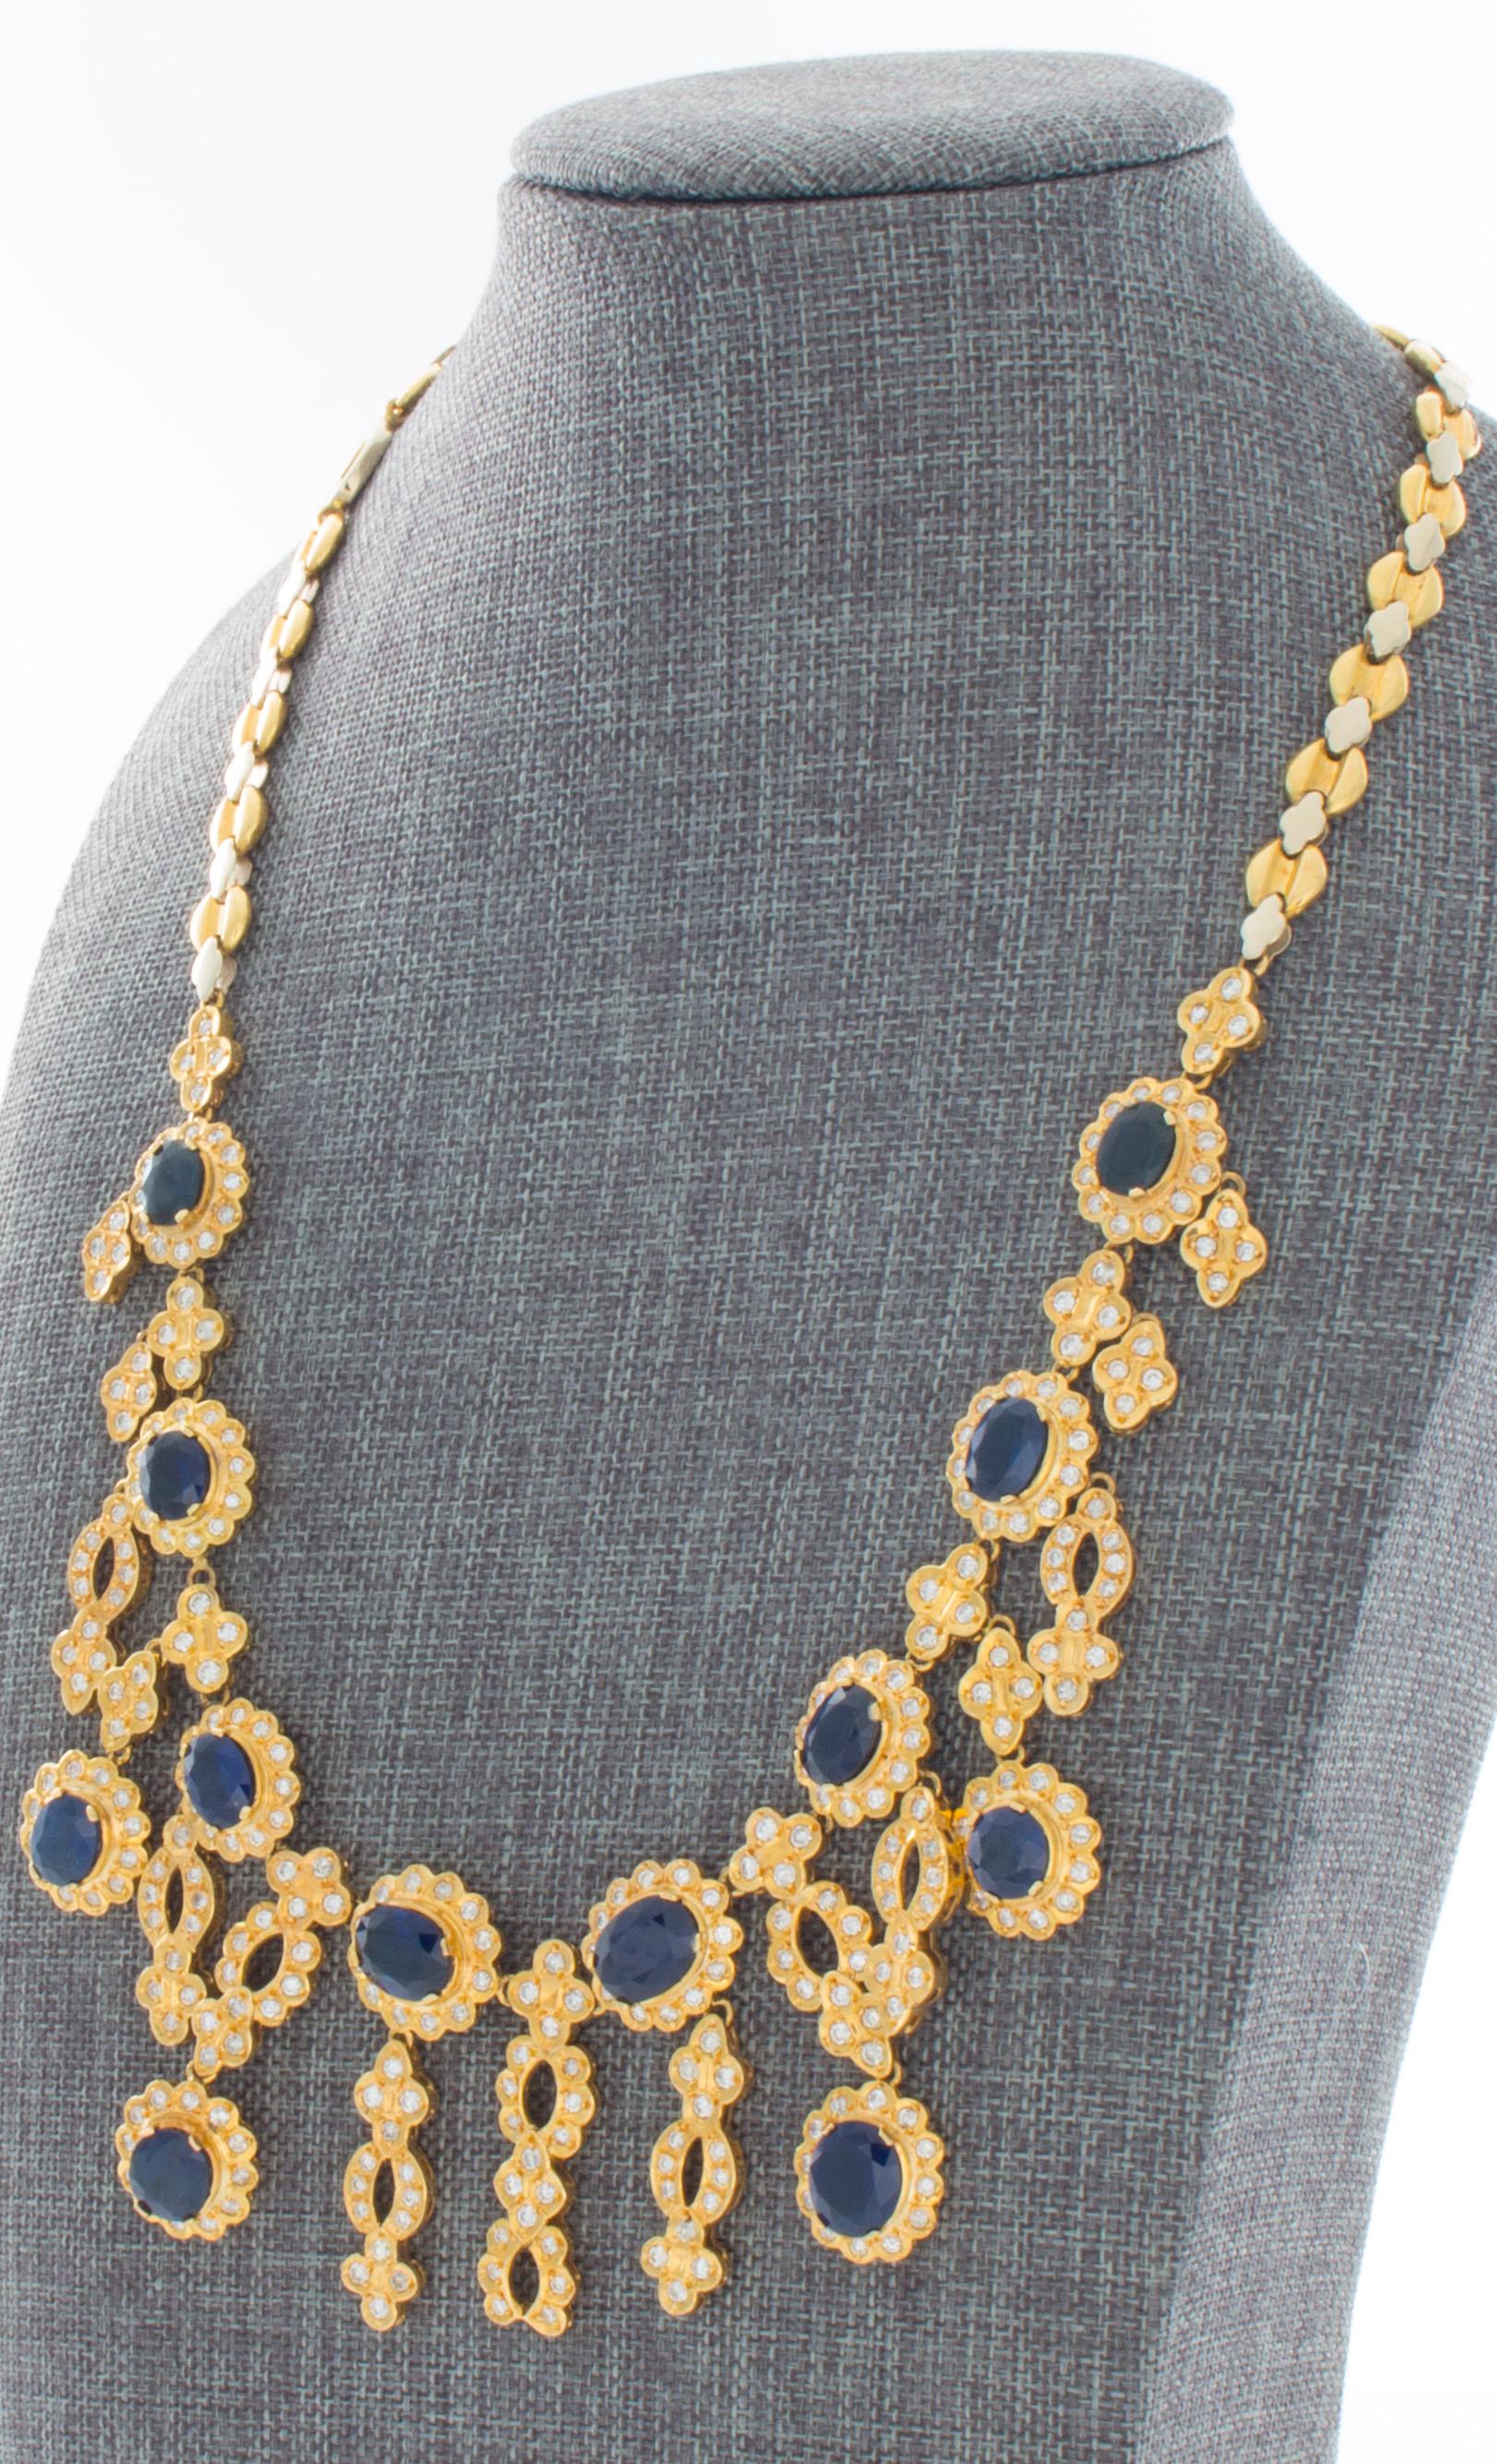 Modern 18 Karat Yellow and White Gold 30.48 Carat Sapphire and Diamond Necklace For Sale